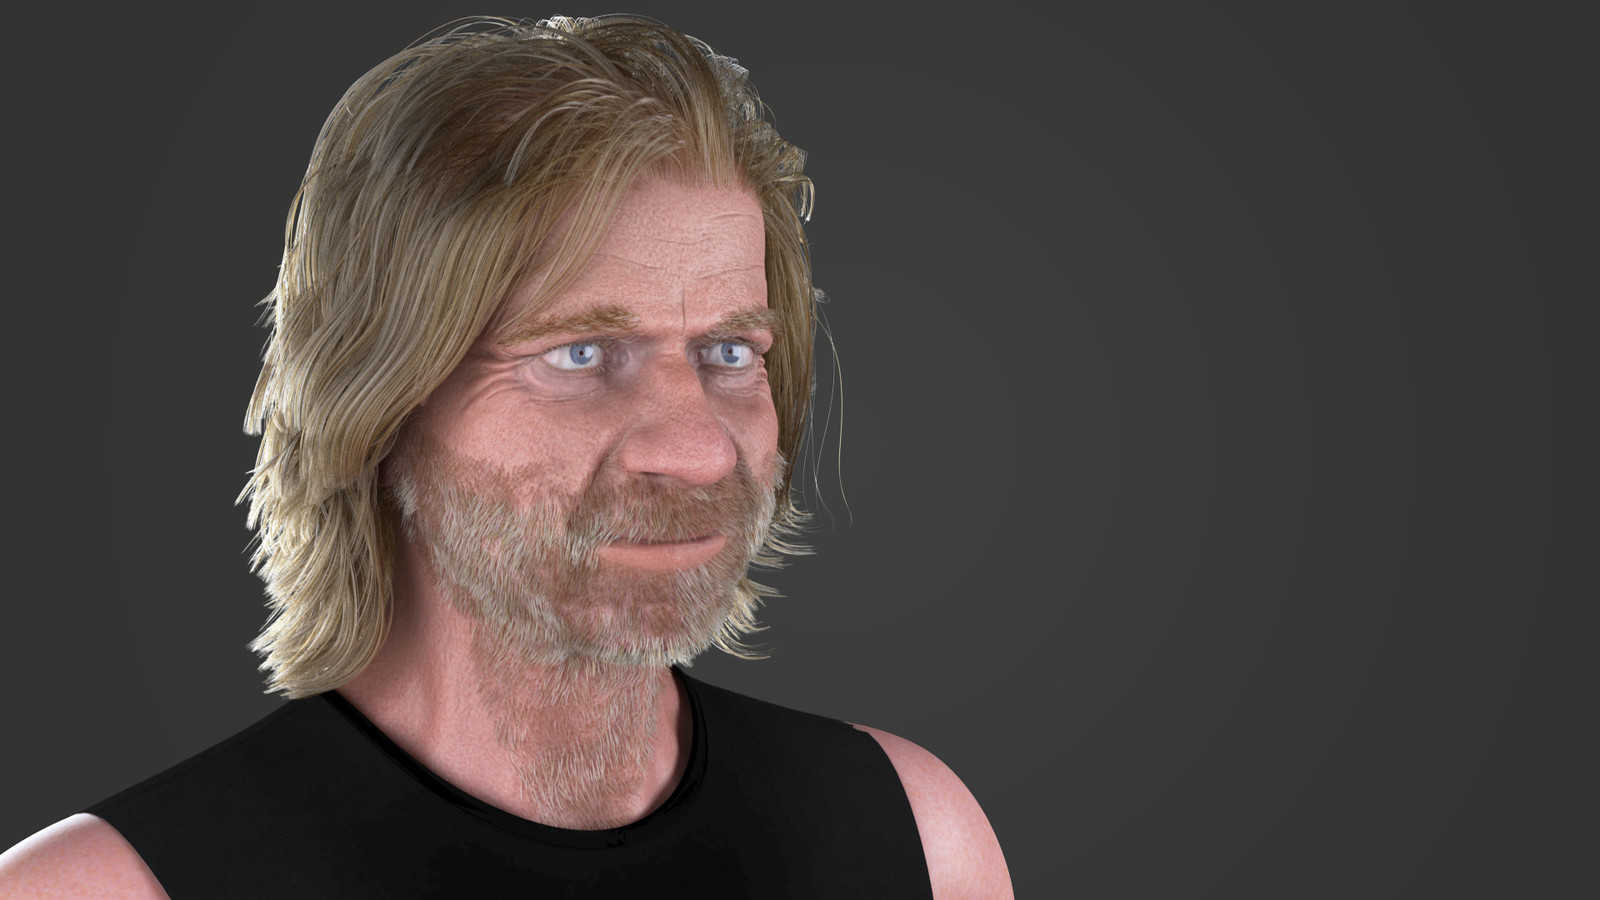 William H. Macy as Frank Gallagher from Shameless